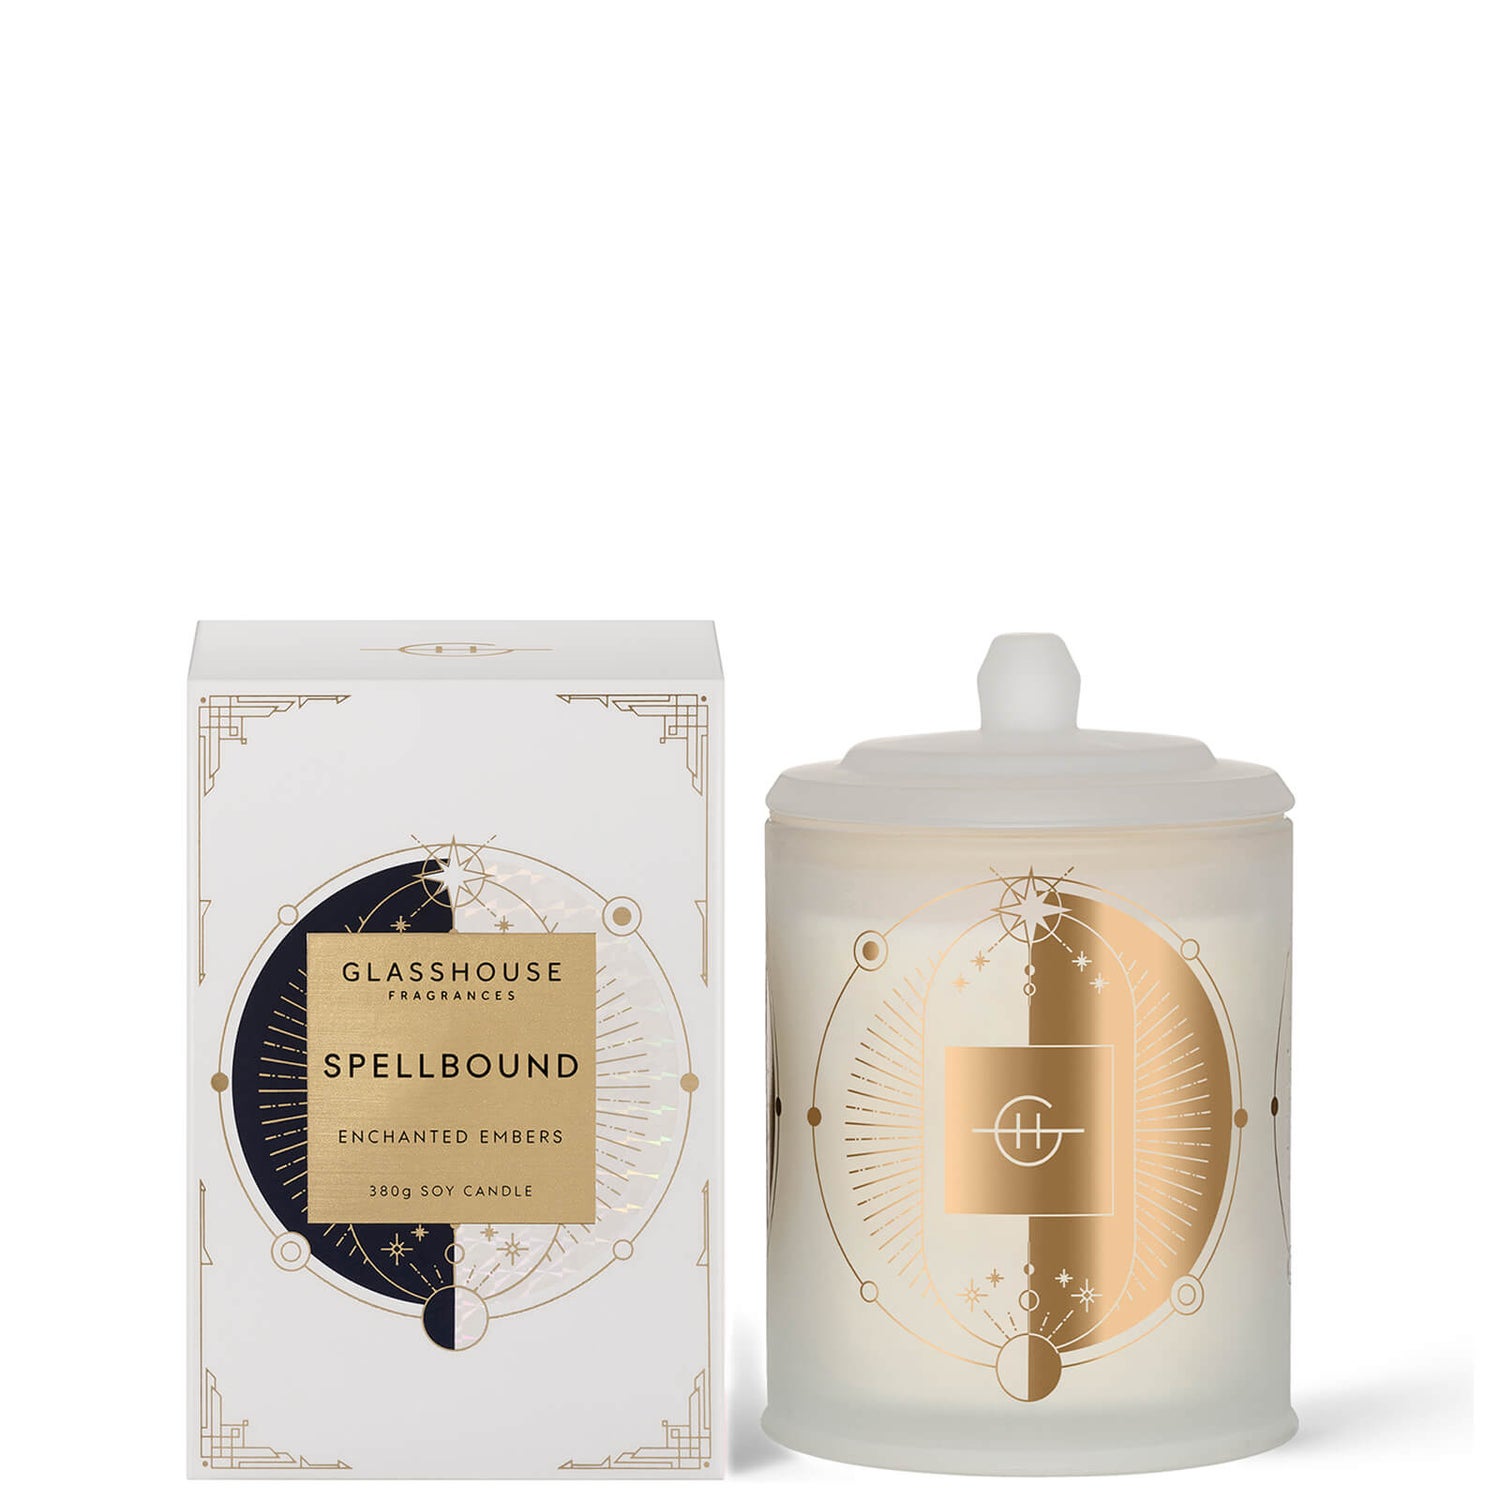 Glasshouse Spellbound Candle 380g